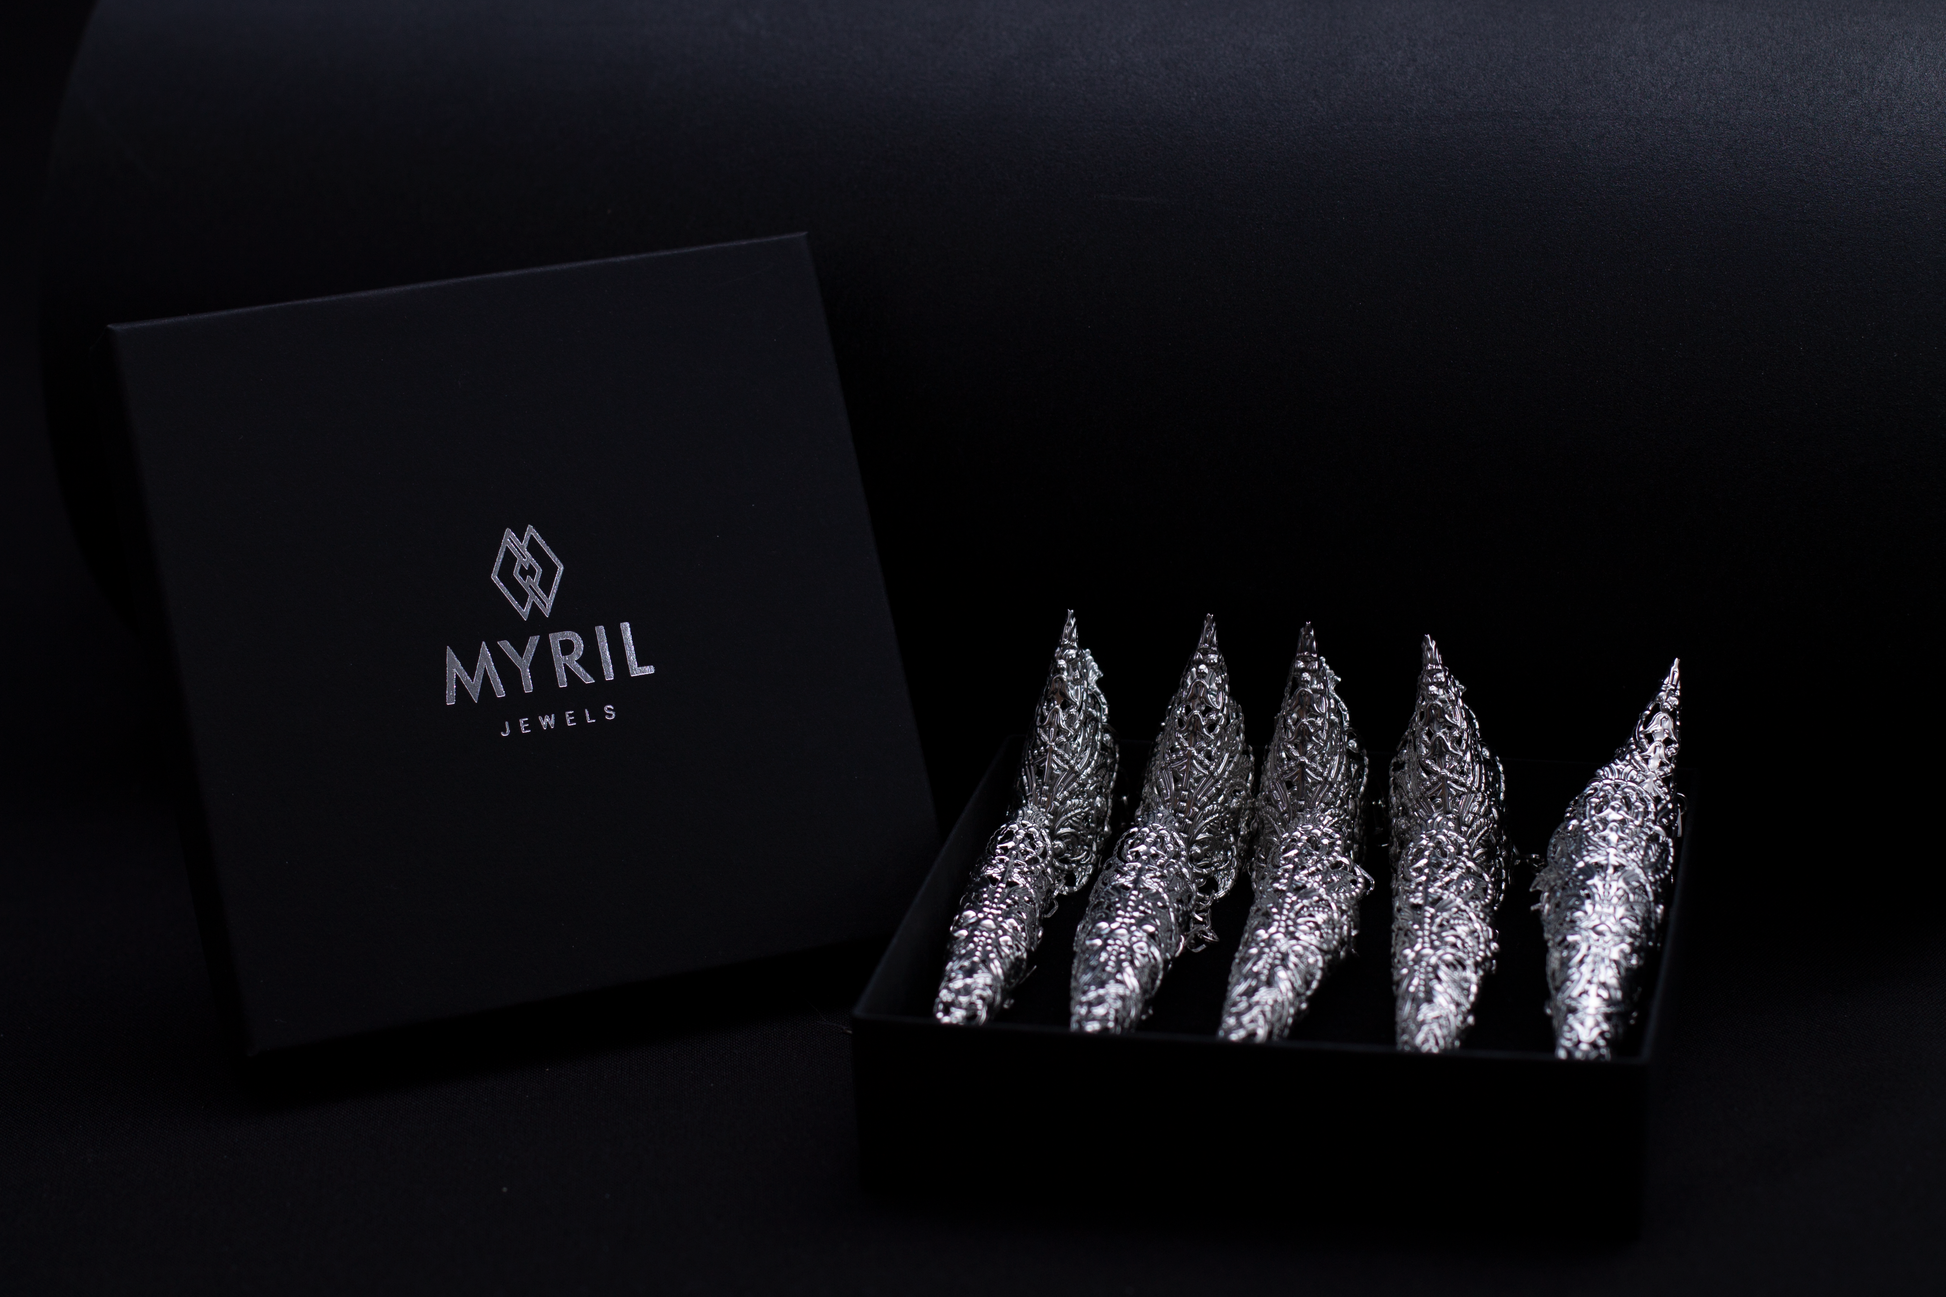 A Myril Jewels presentation box elegantly displays a set of silver dragon-like claw rings. Their intricate design captures the essence of neo-goth jewelry, ideal for adding a dramatic touch to Halloween or everyday gothic-chic attire, and makes a bold statement for lovers of dark avant-garde fashion.